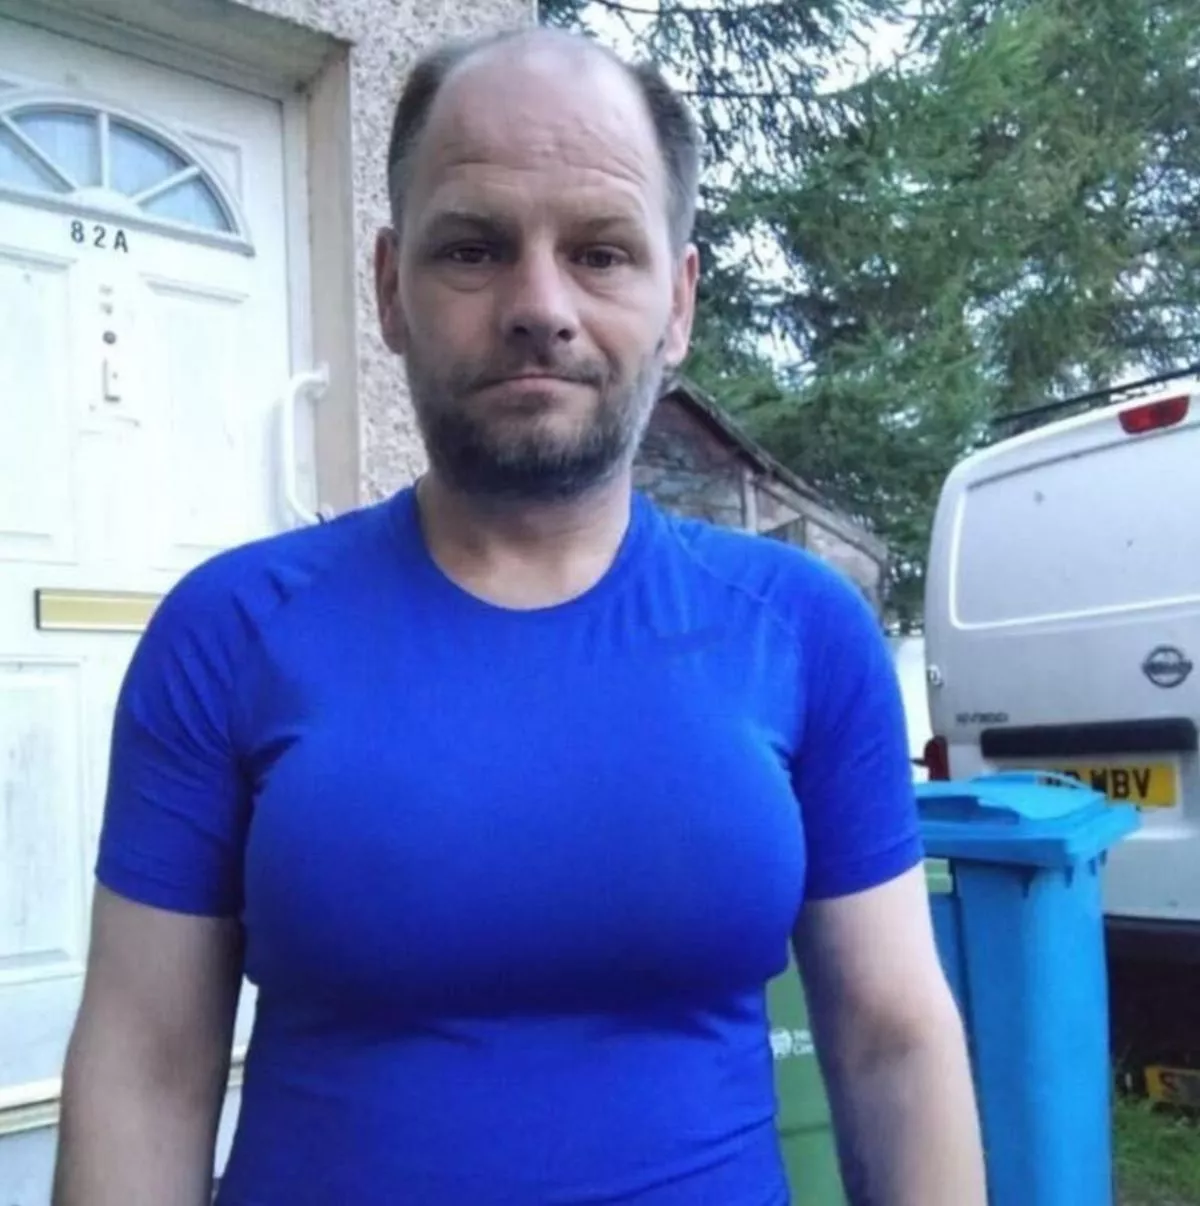 Dad With Fake Breasts Seeks Privacy, Declares 'I'm Happy With Who I Am'